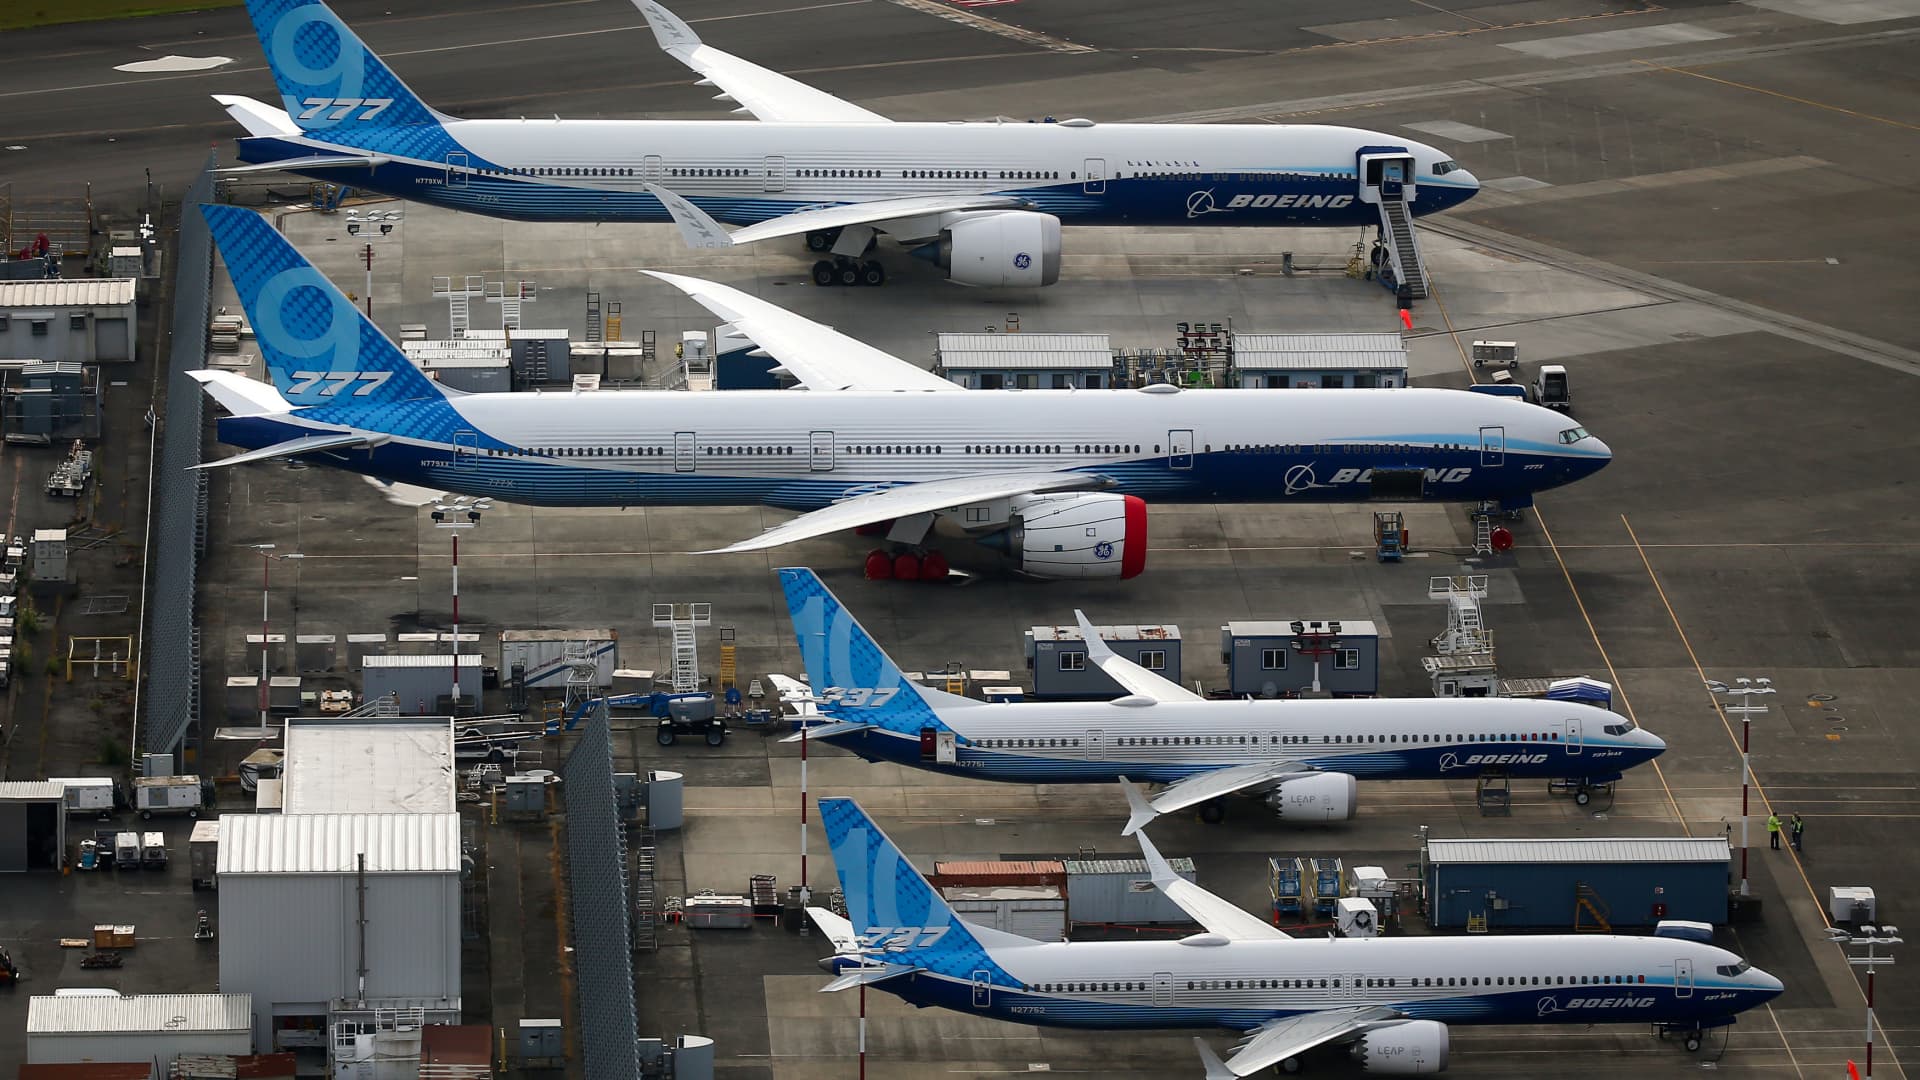 Boeing (BA) 2Q 2022 earnings are lower than estimates